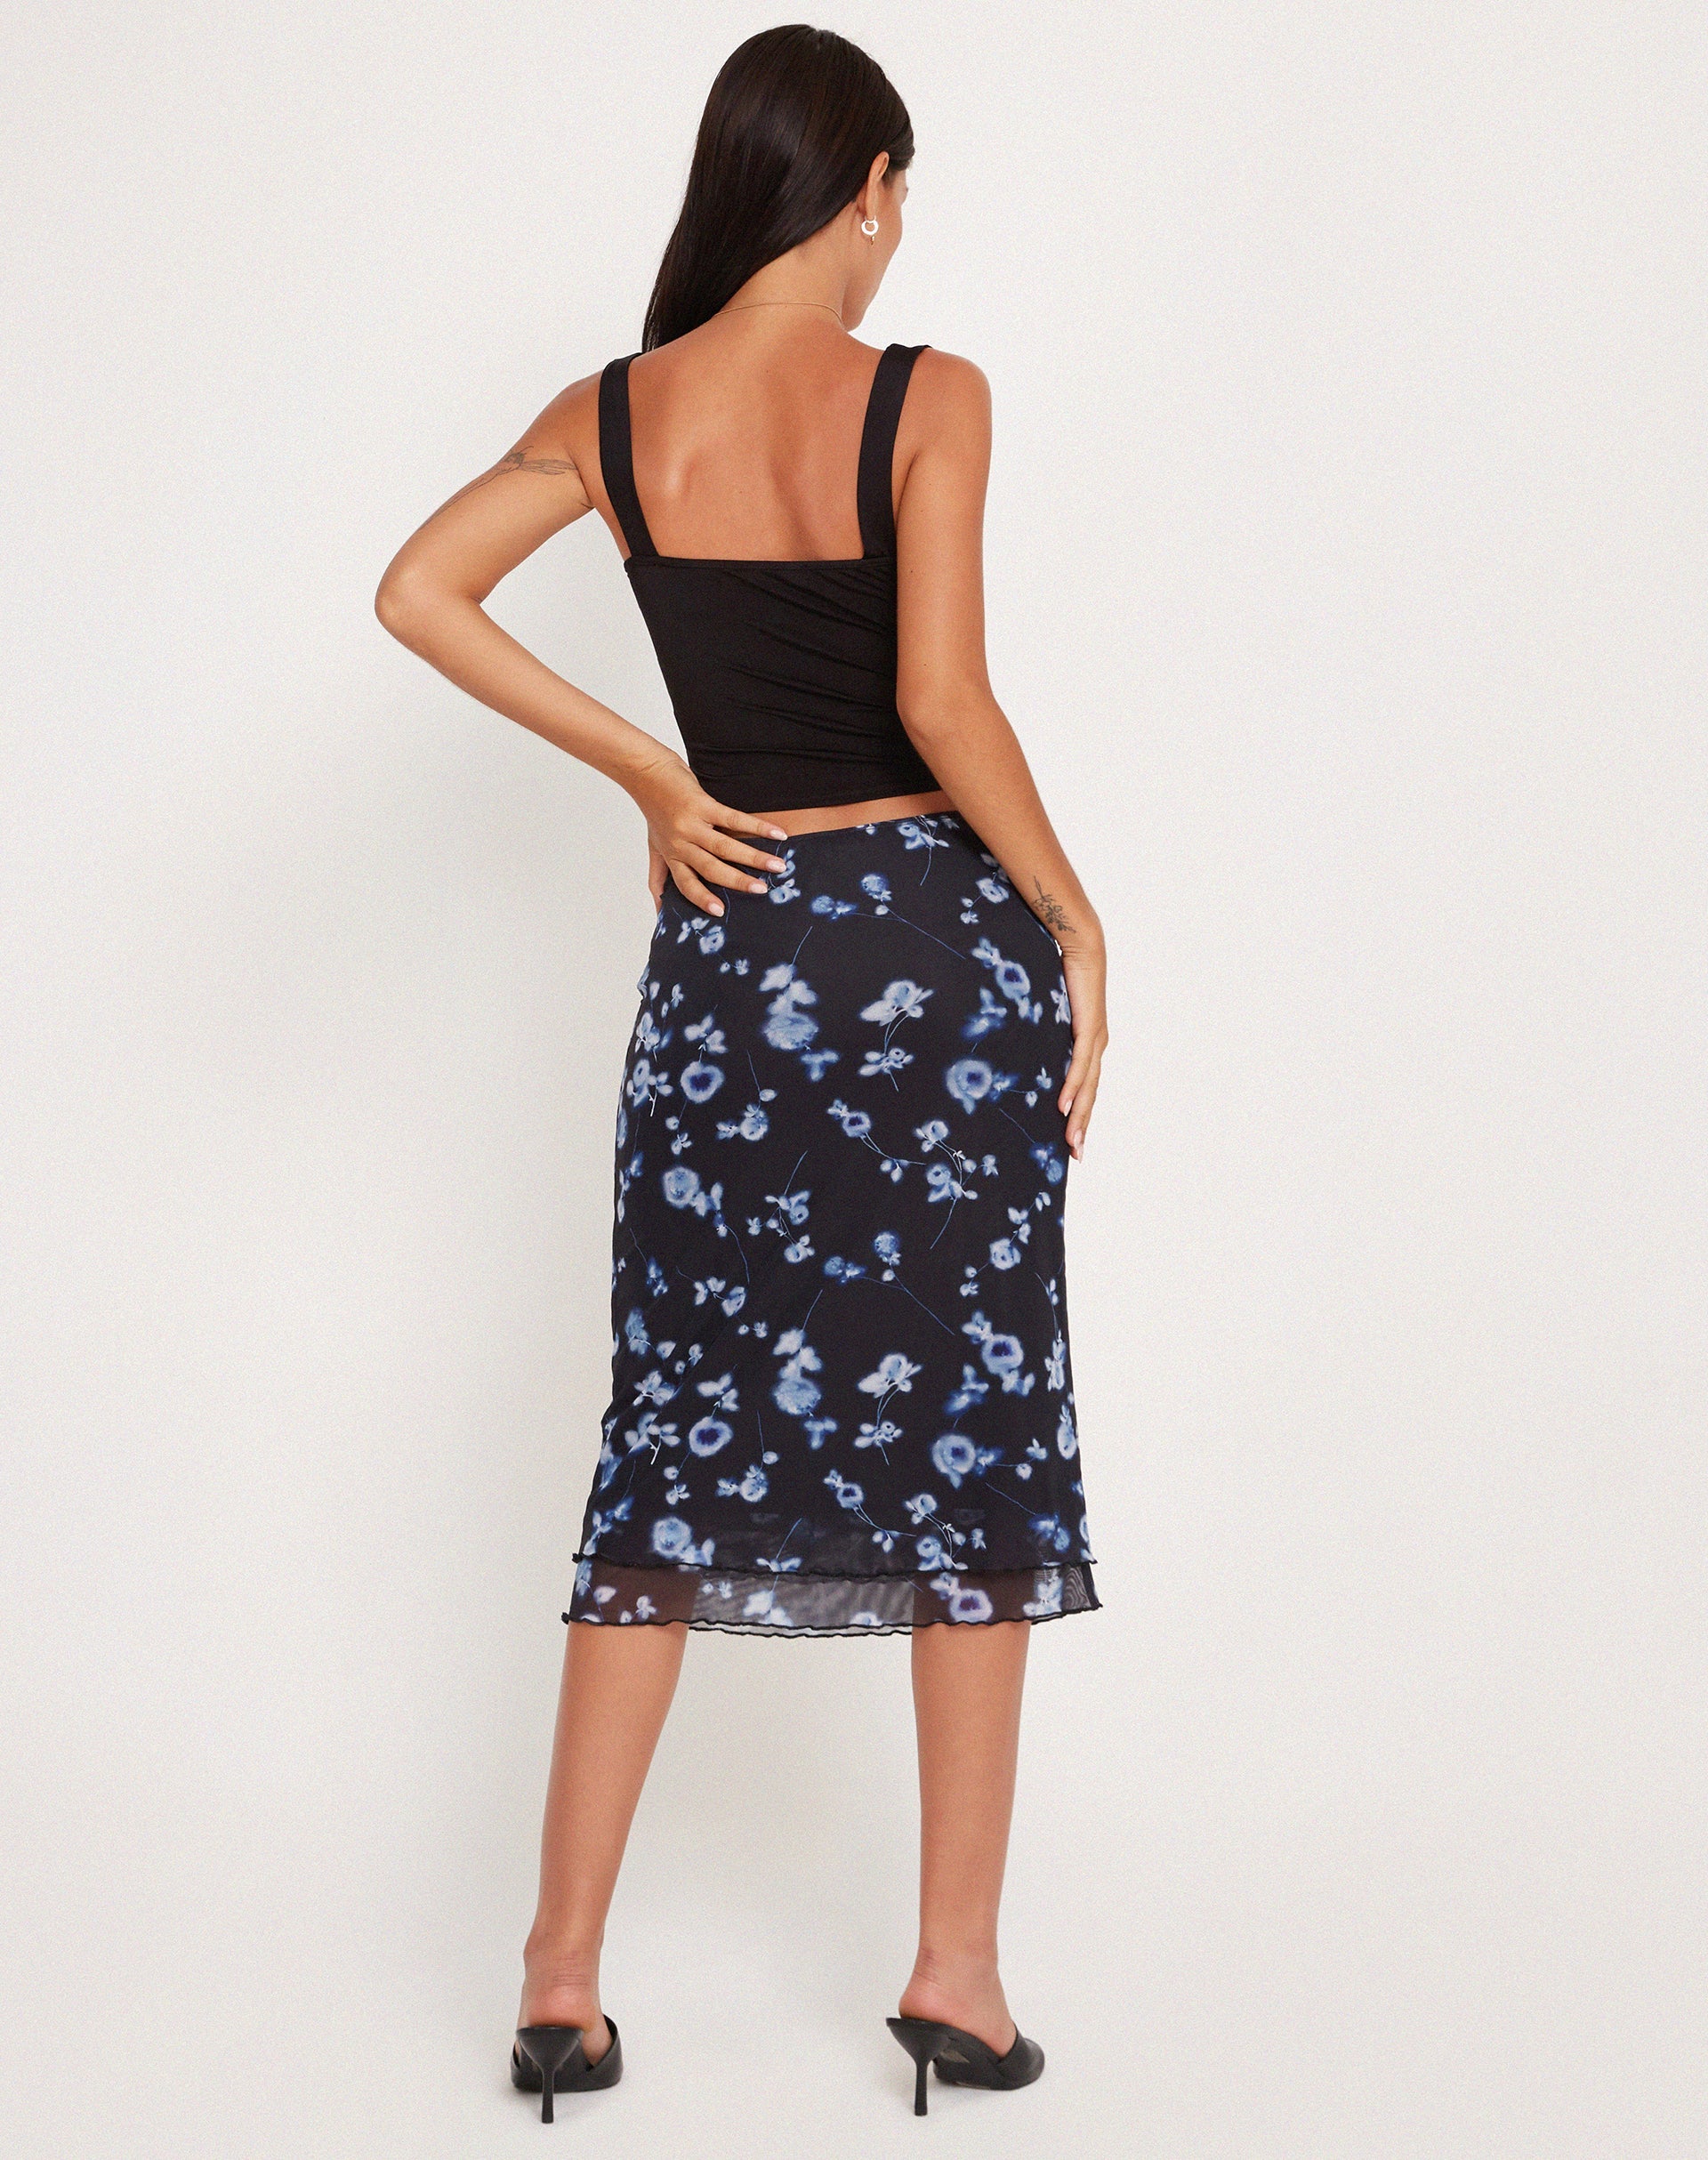 Image of Eldonia Mid Skirt in Mesh Navy Diffused Floral